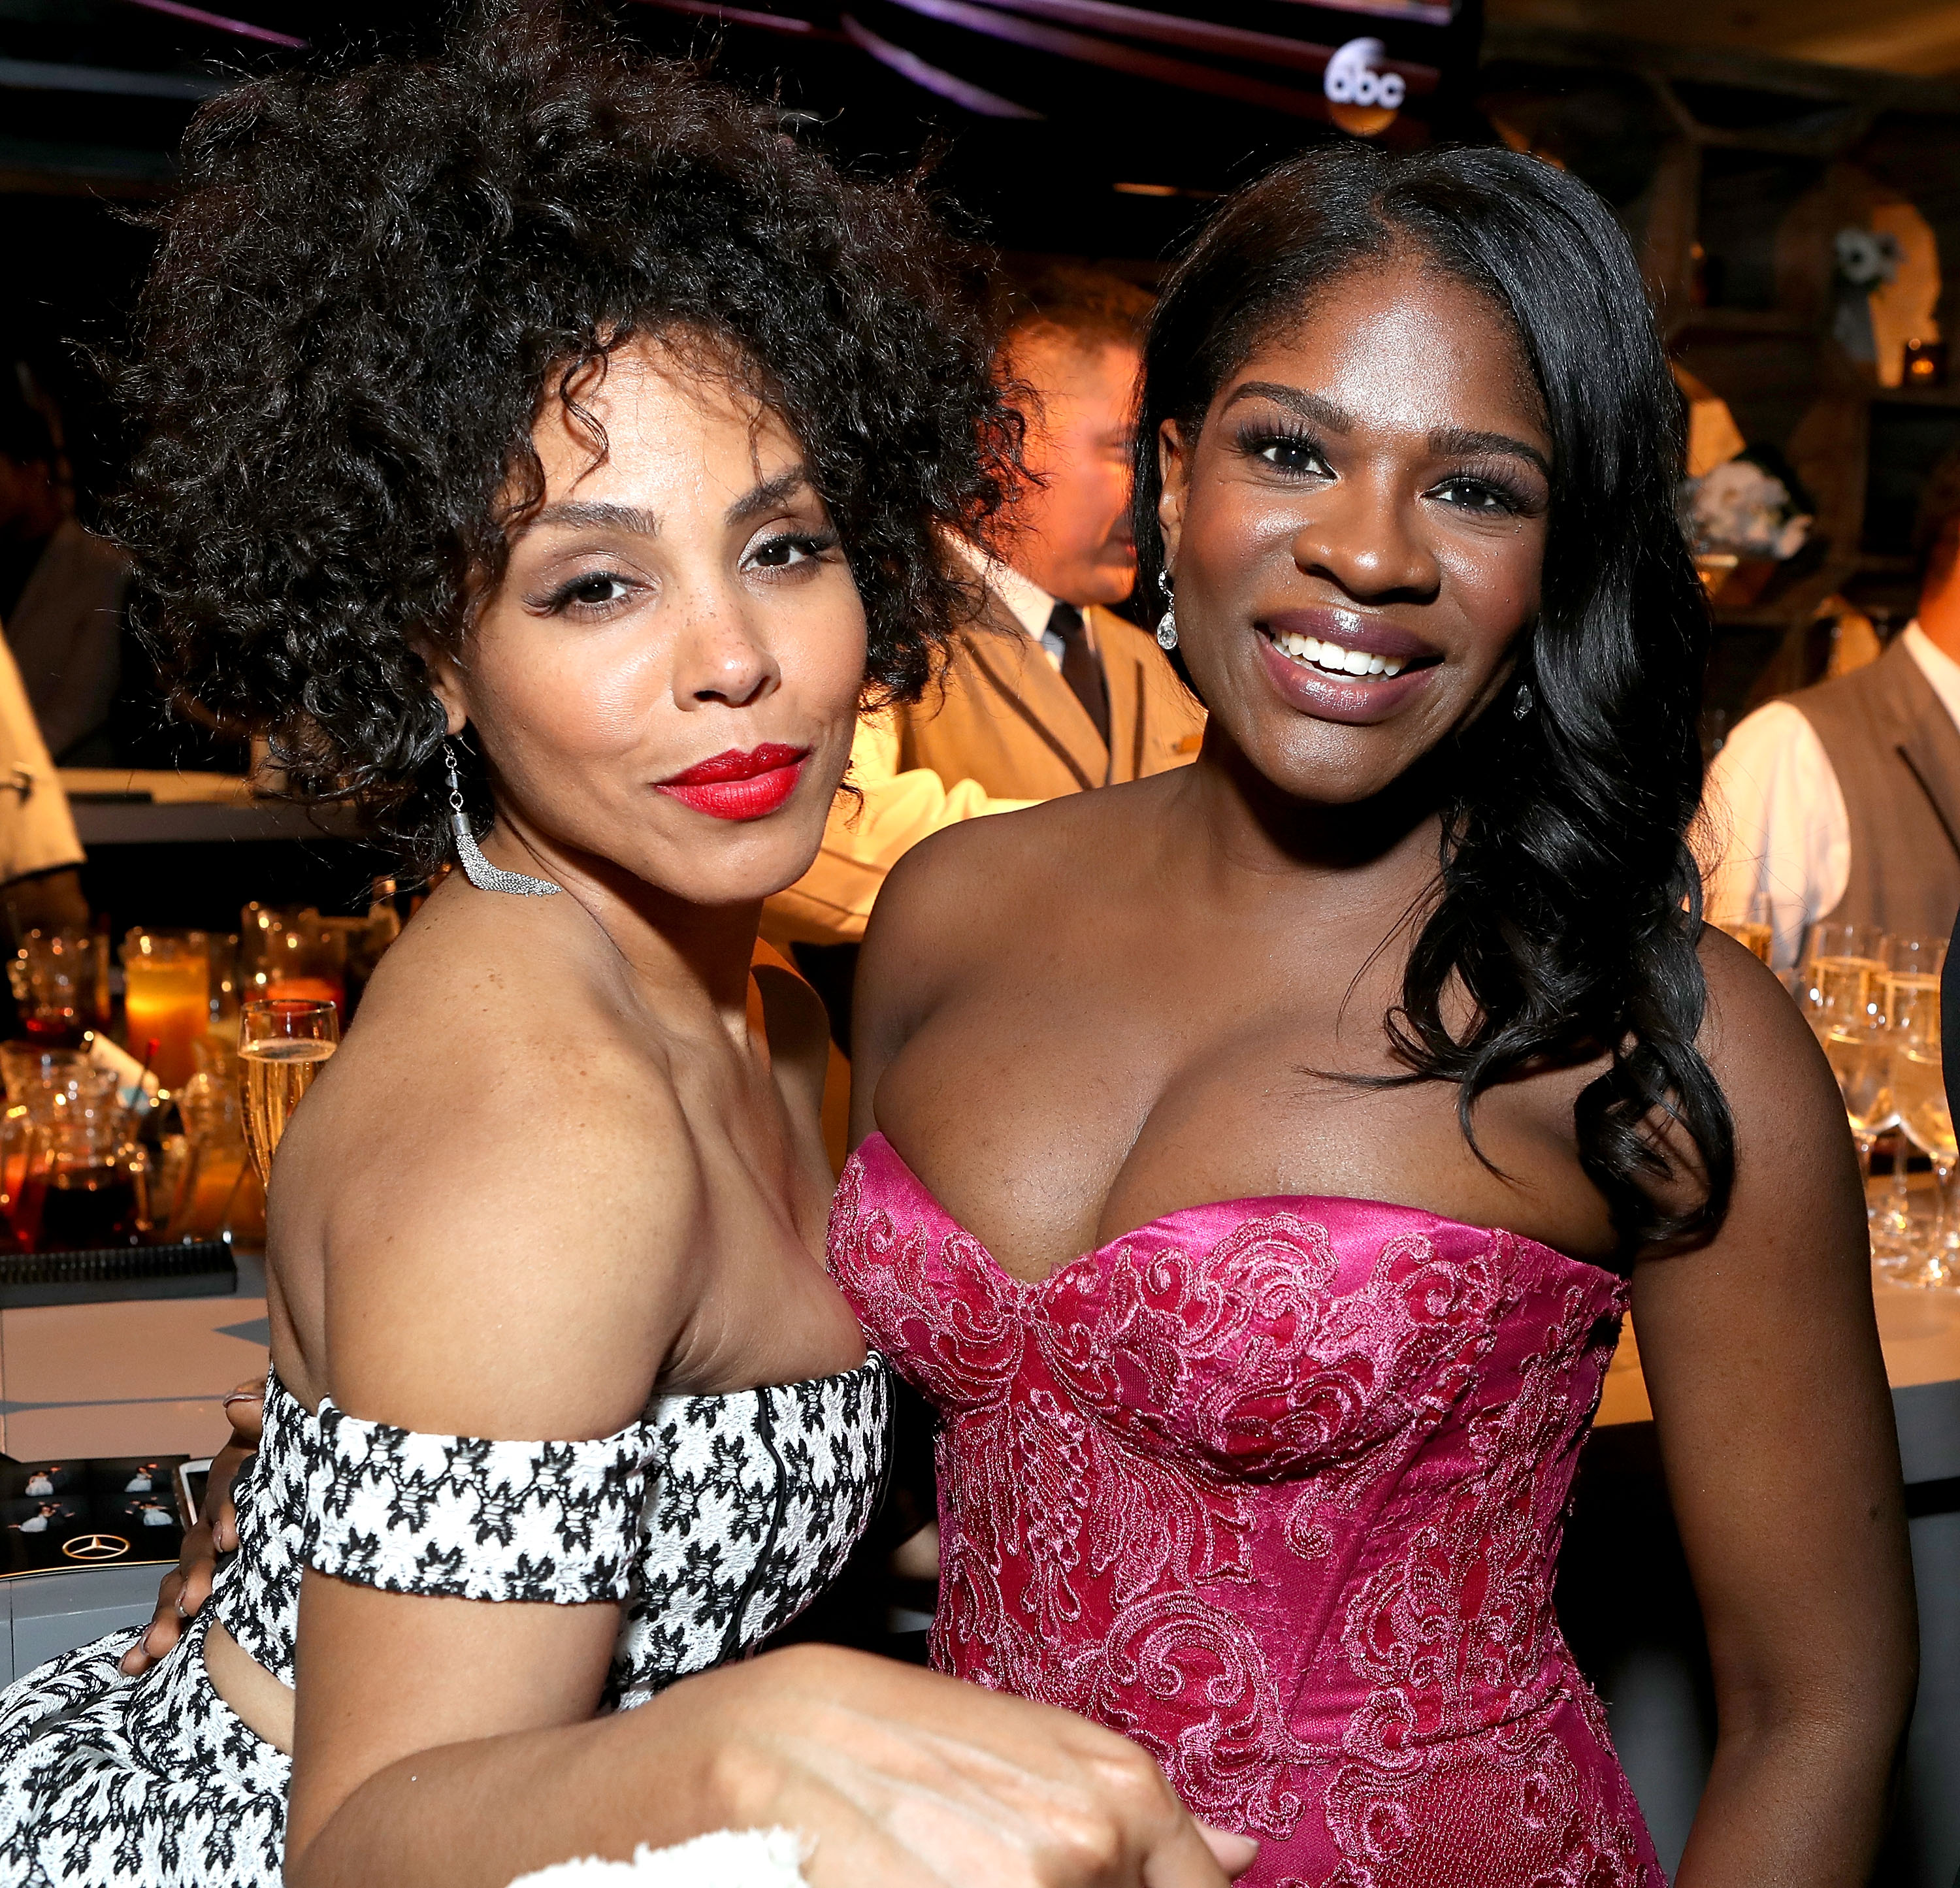  Actresses Amirah Vann (L) and Edwina Findley (Photo by Randy Shropshire/Getty Images for Mercedes-Benz USA)